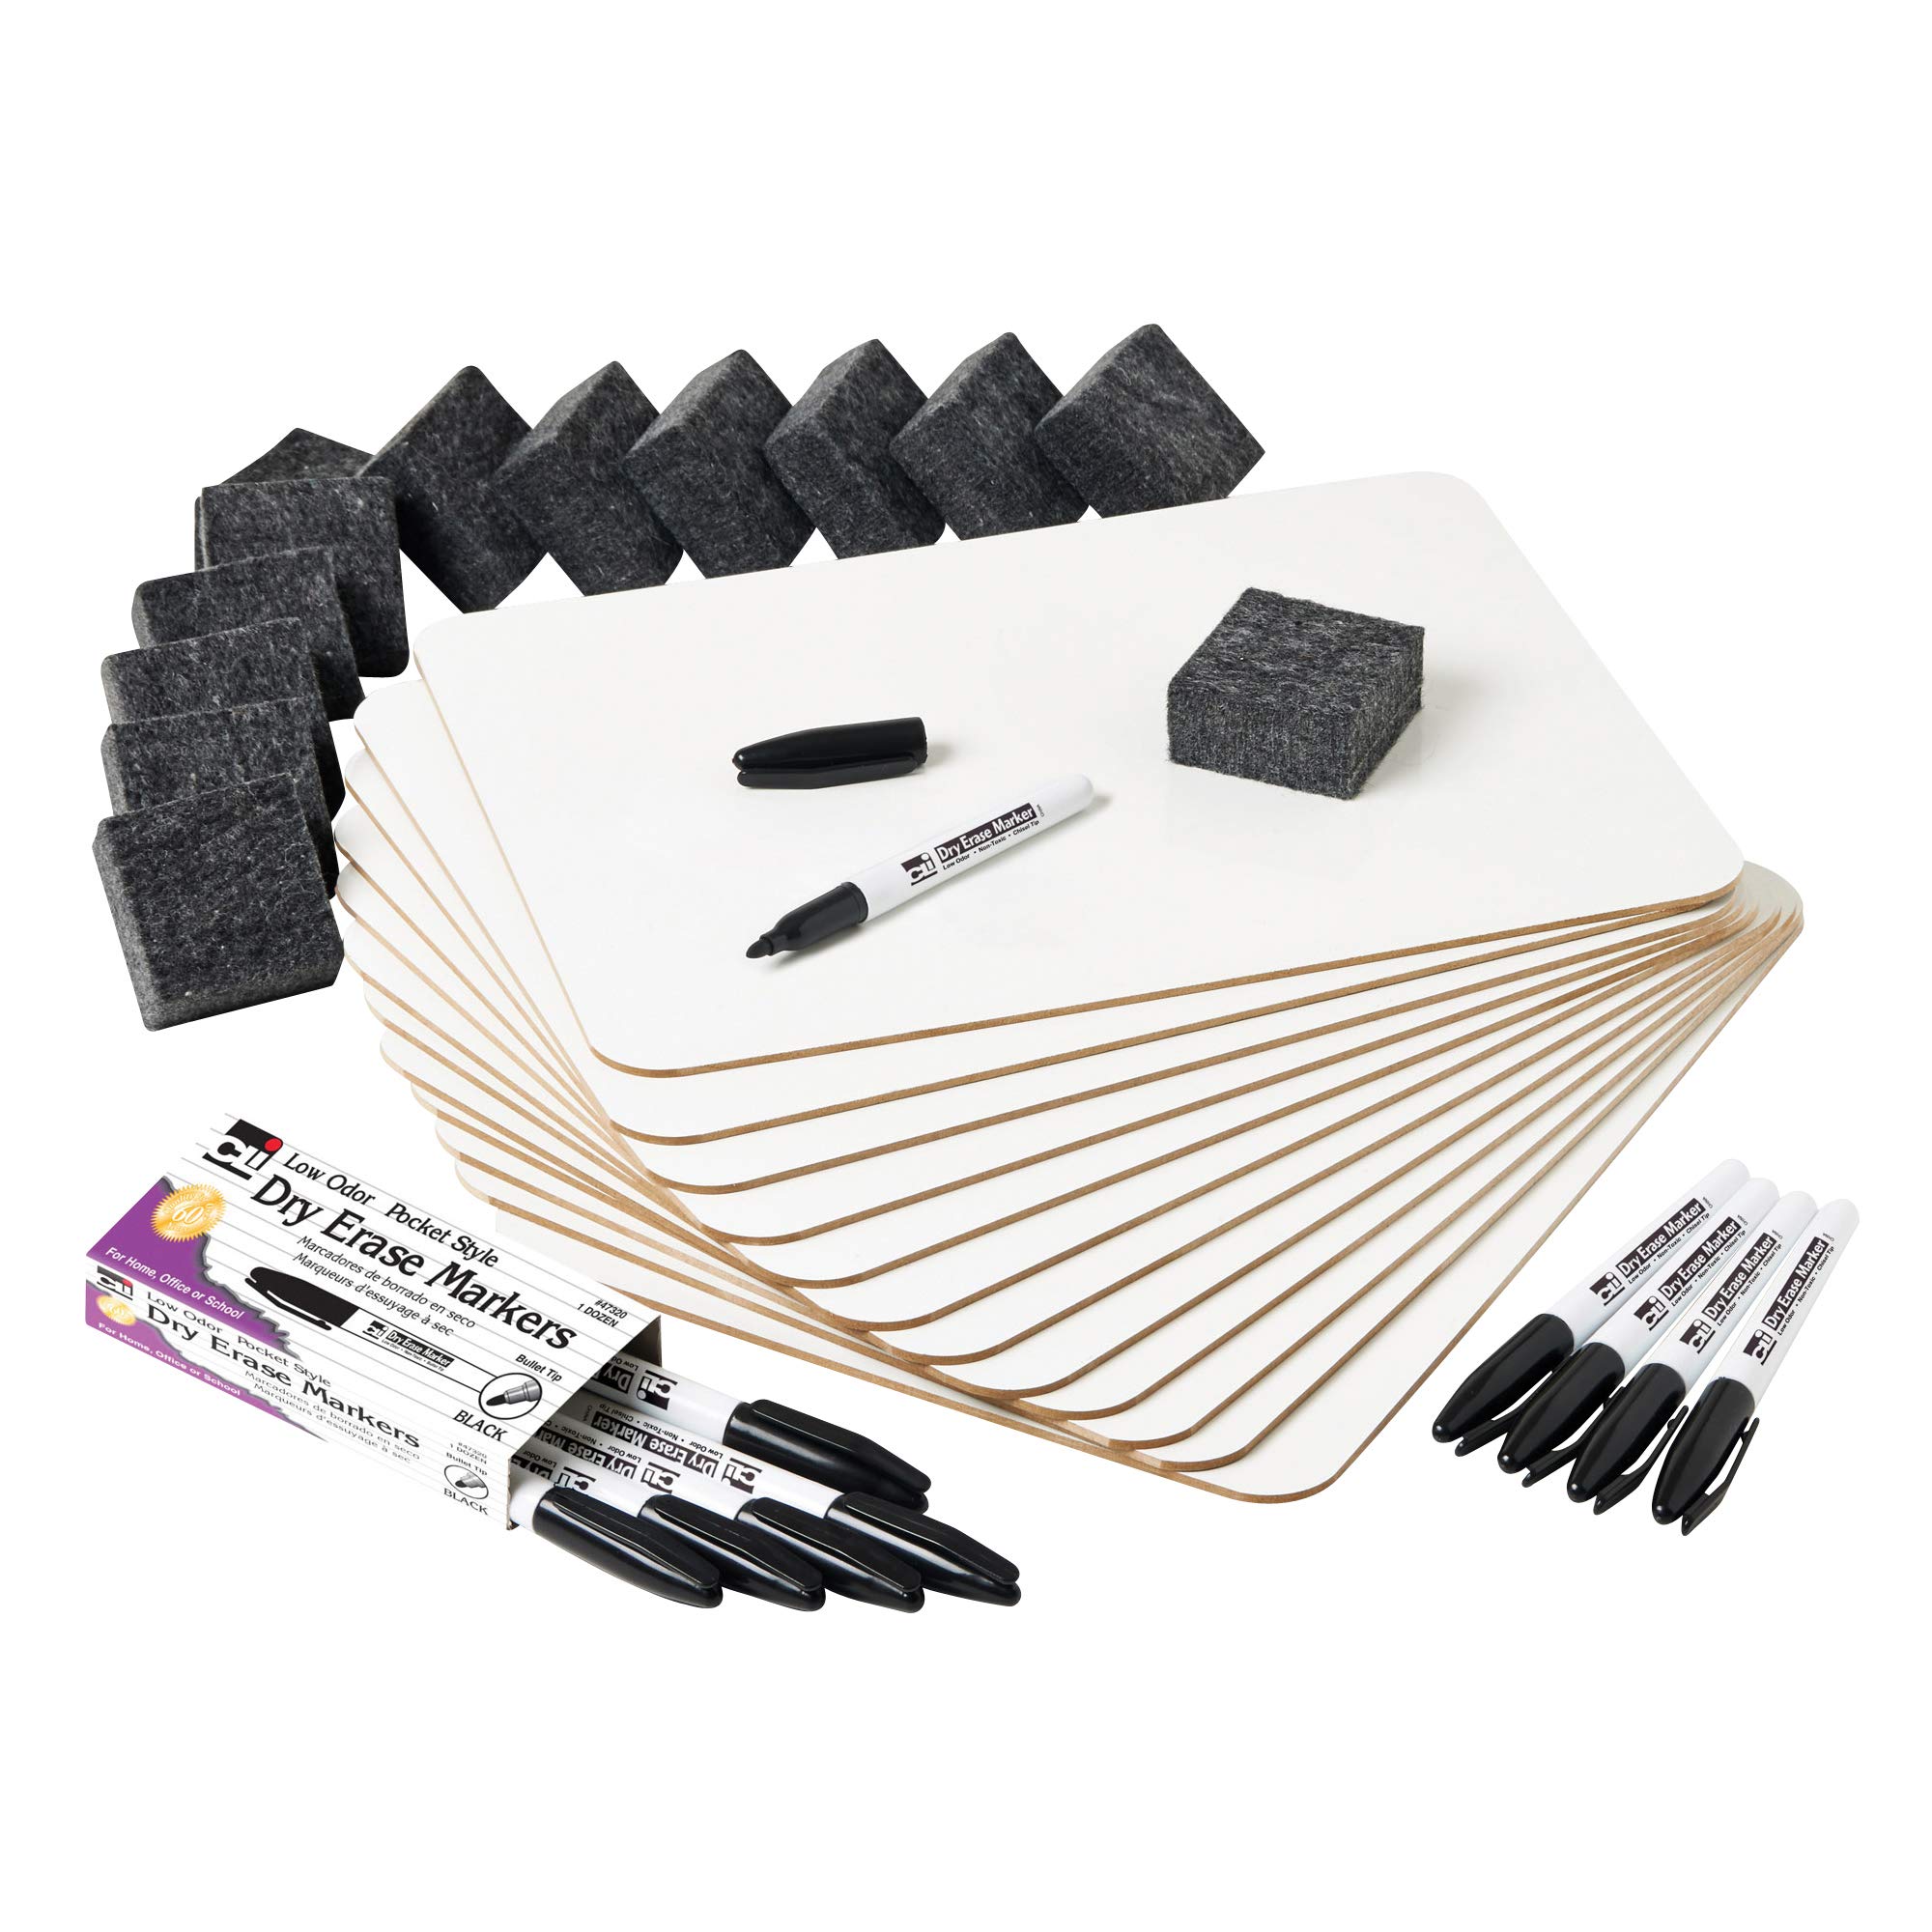 Charles Leonard Dry Erase Lapboard Class Pack, Includes 12 each of Whiteboards, 2 Inch Felt Erasers and Black Dry Erase Markers (35036)